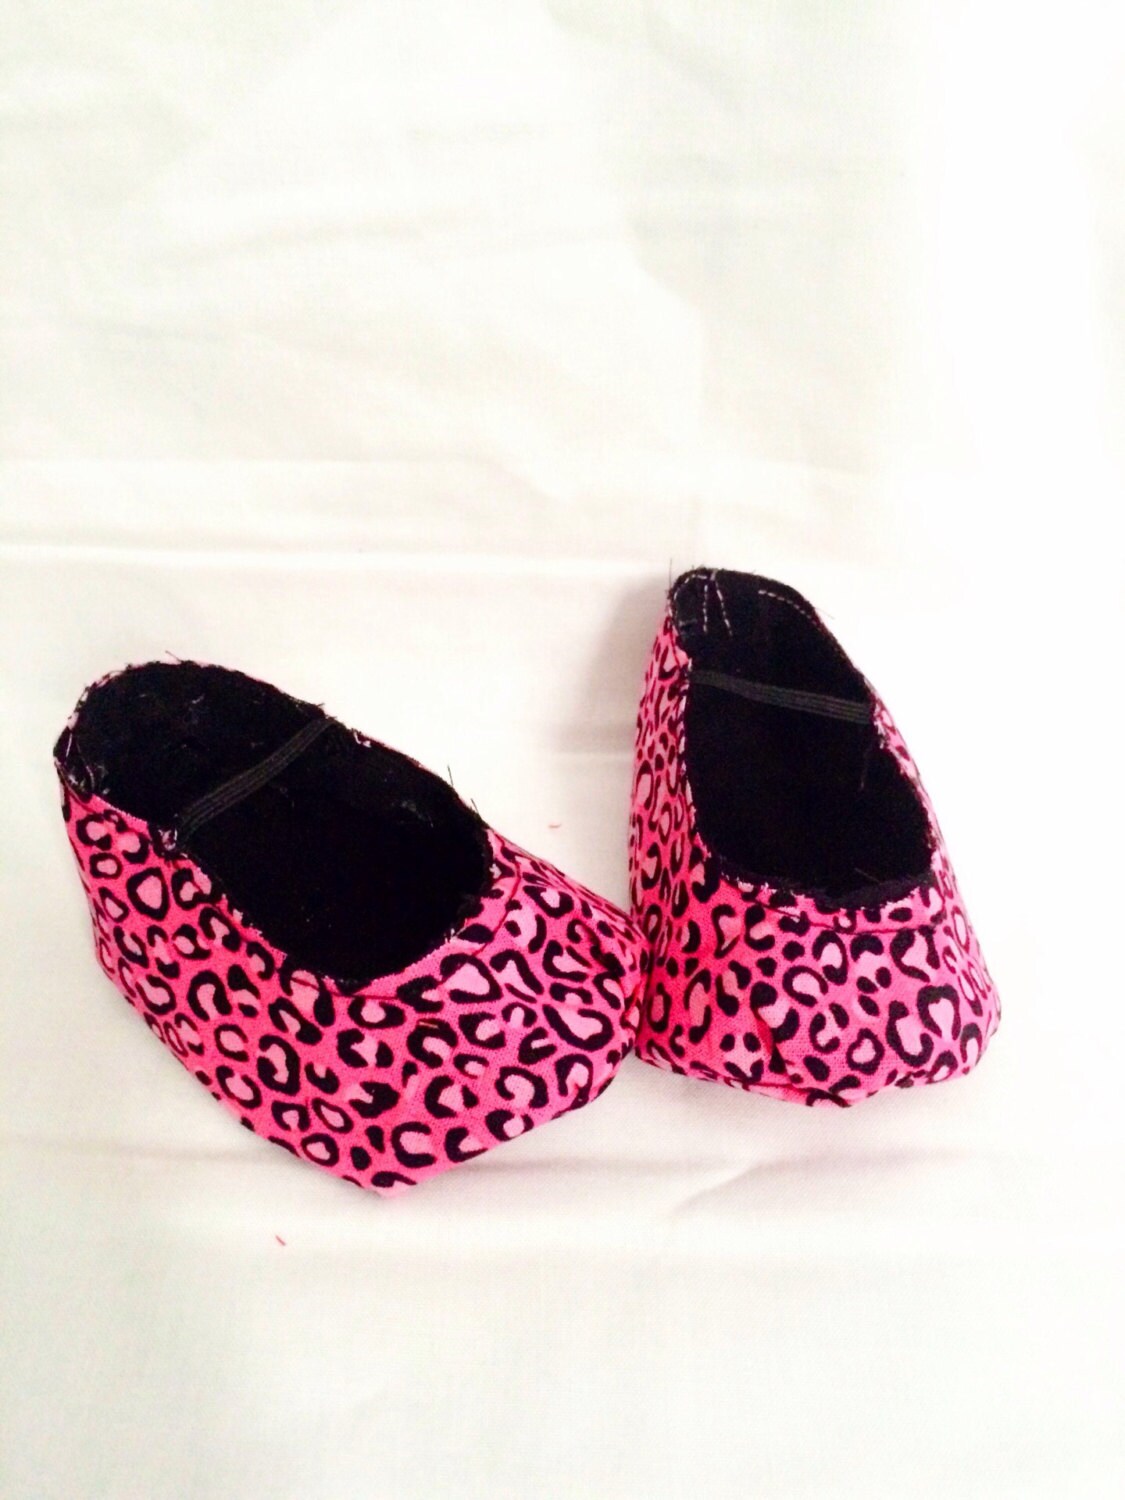 6-9m baby girl slippers by Rockabillymadness on Etsy